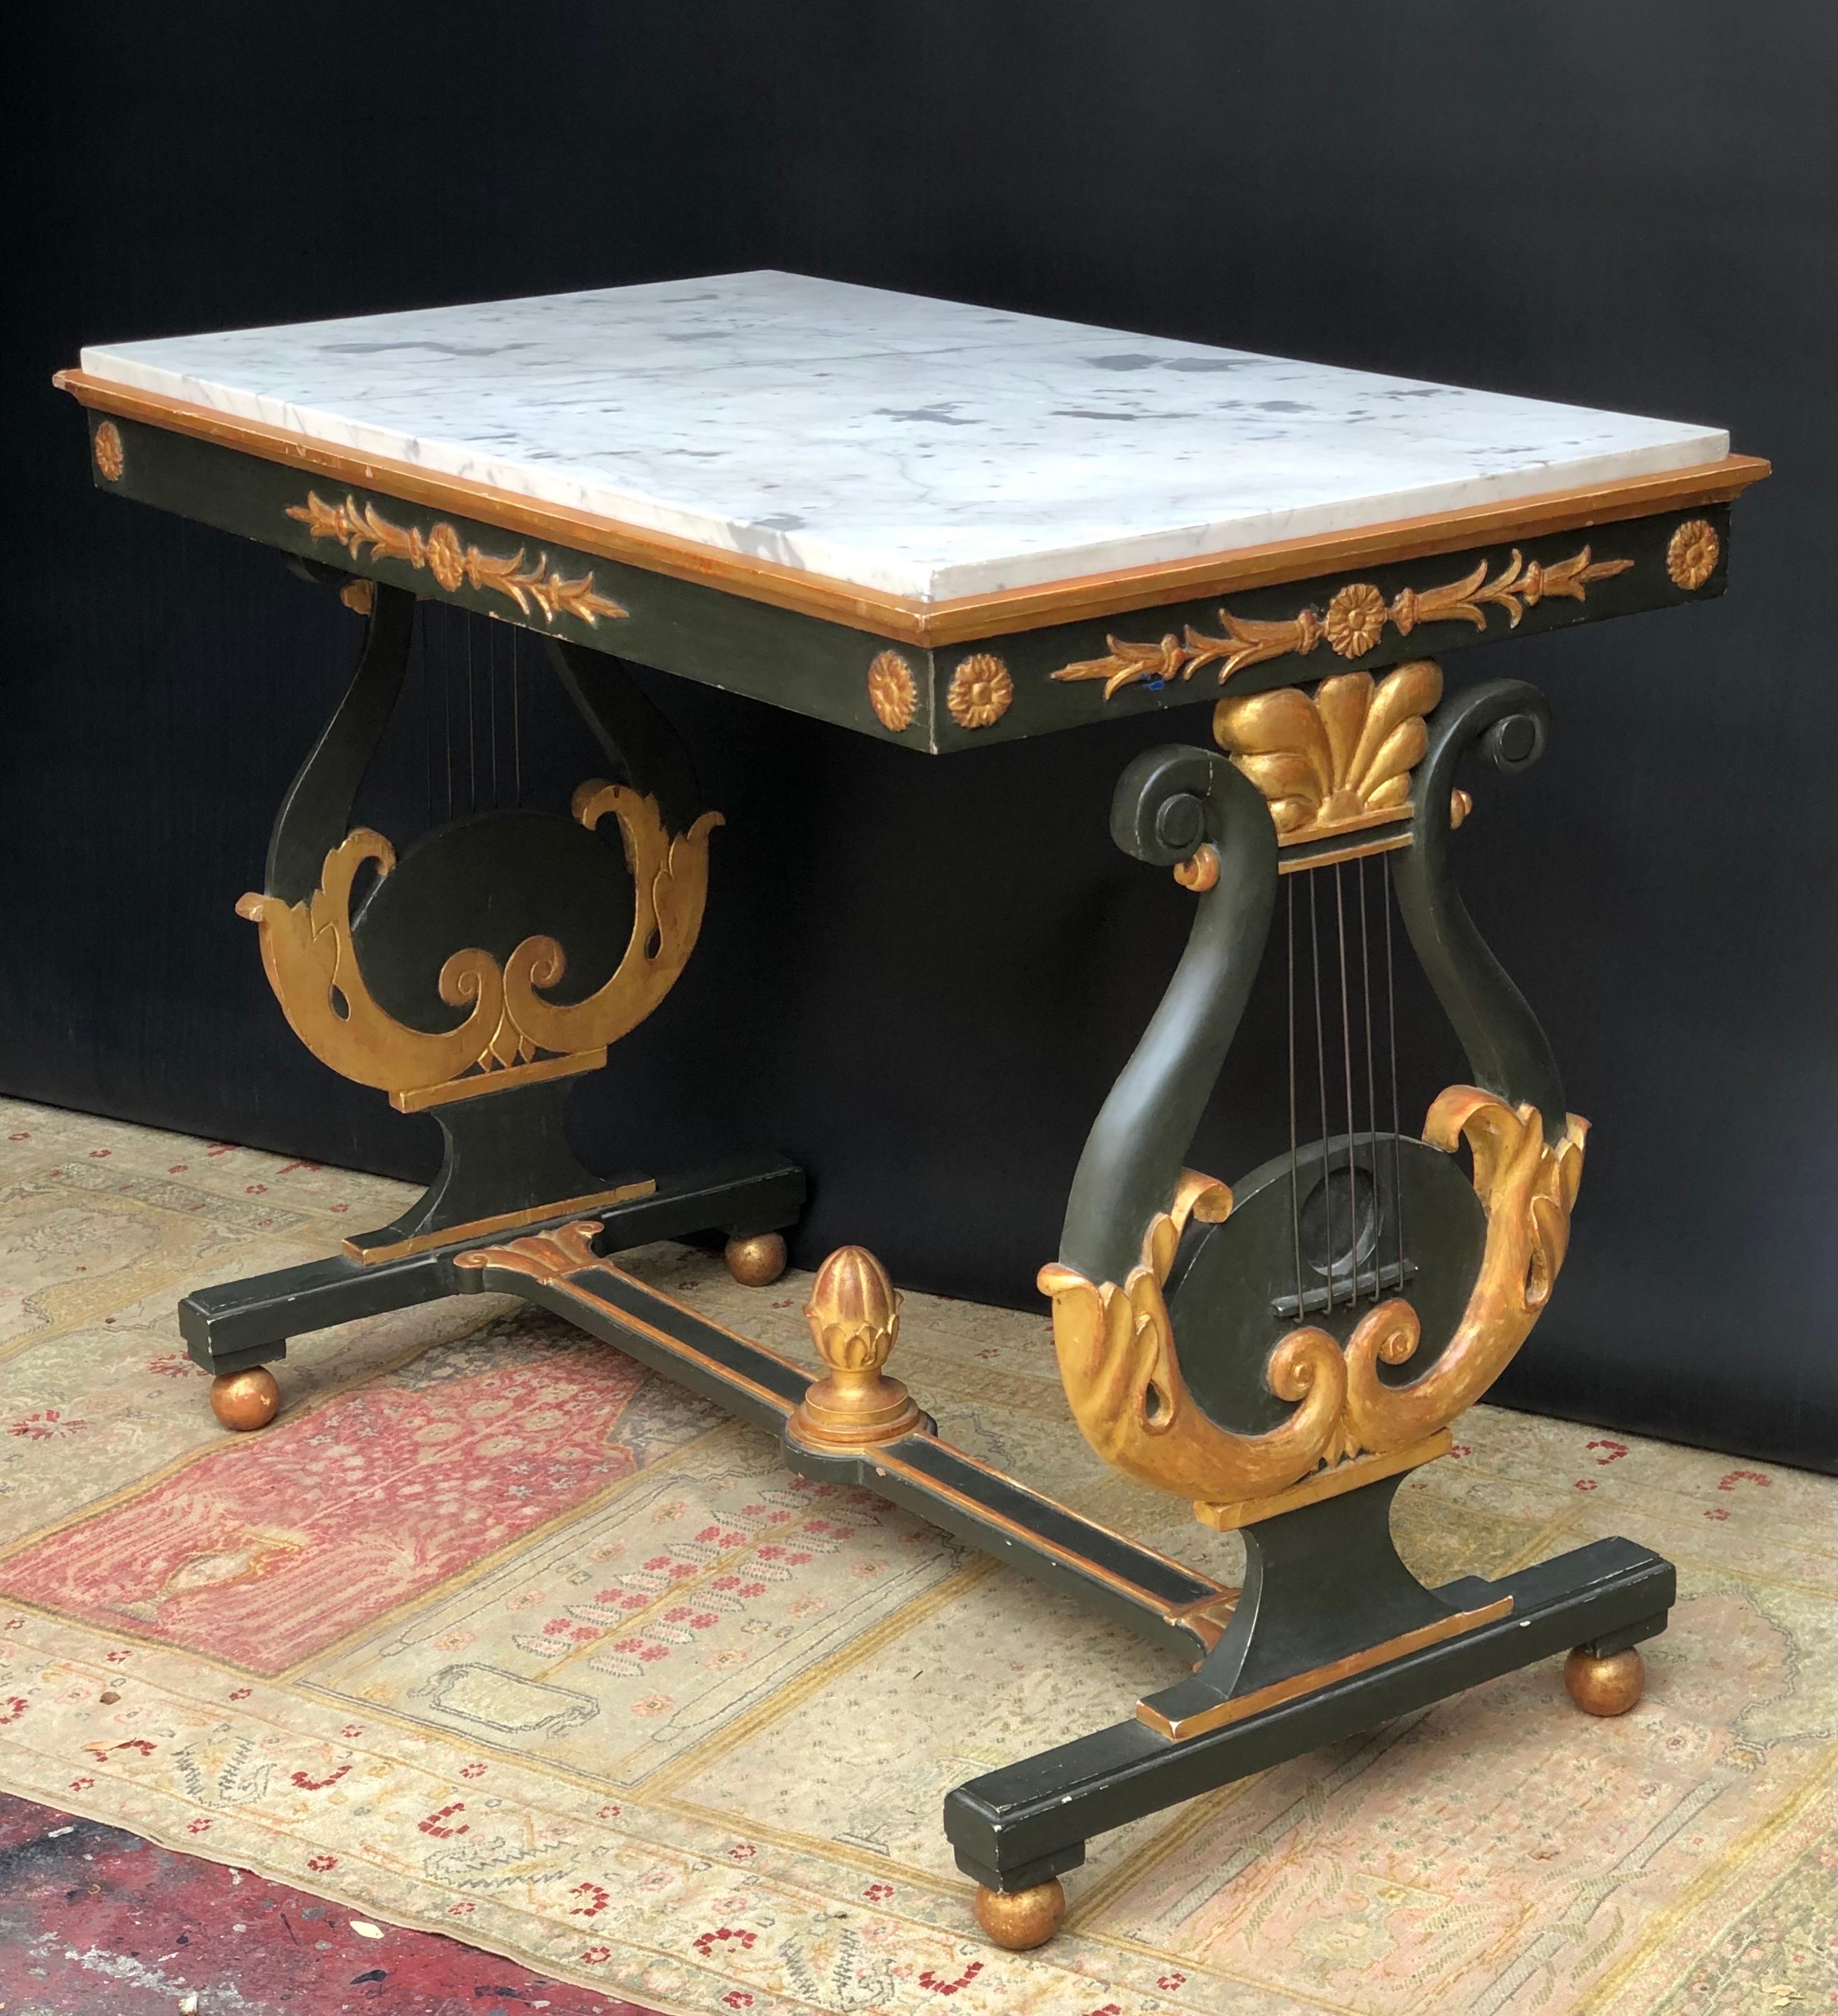 19th Century Neoclassic Italian Parcel-Gilt Verde Lyre Base Marble Top Table / Console 19th C